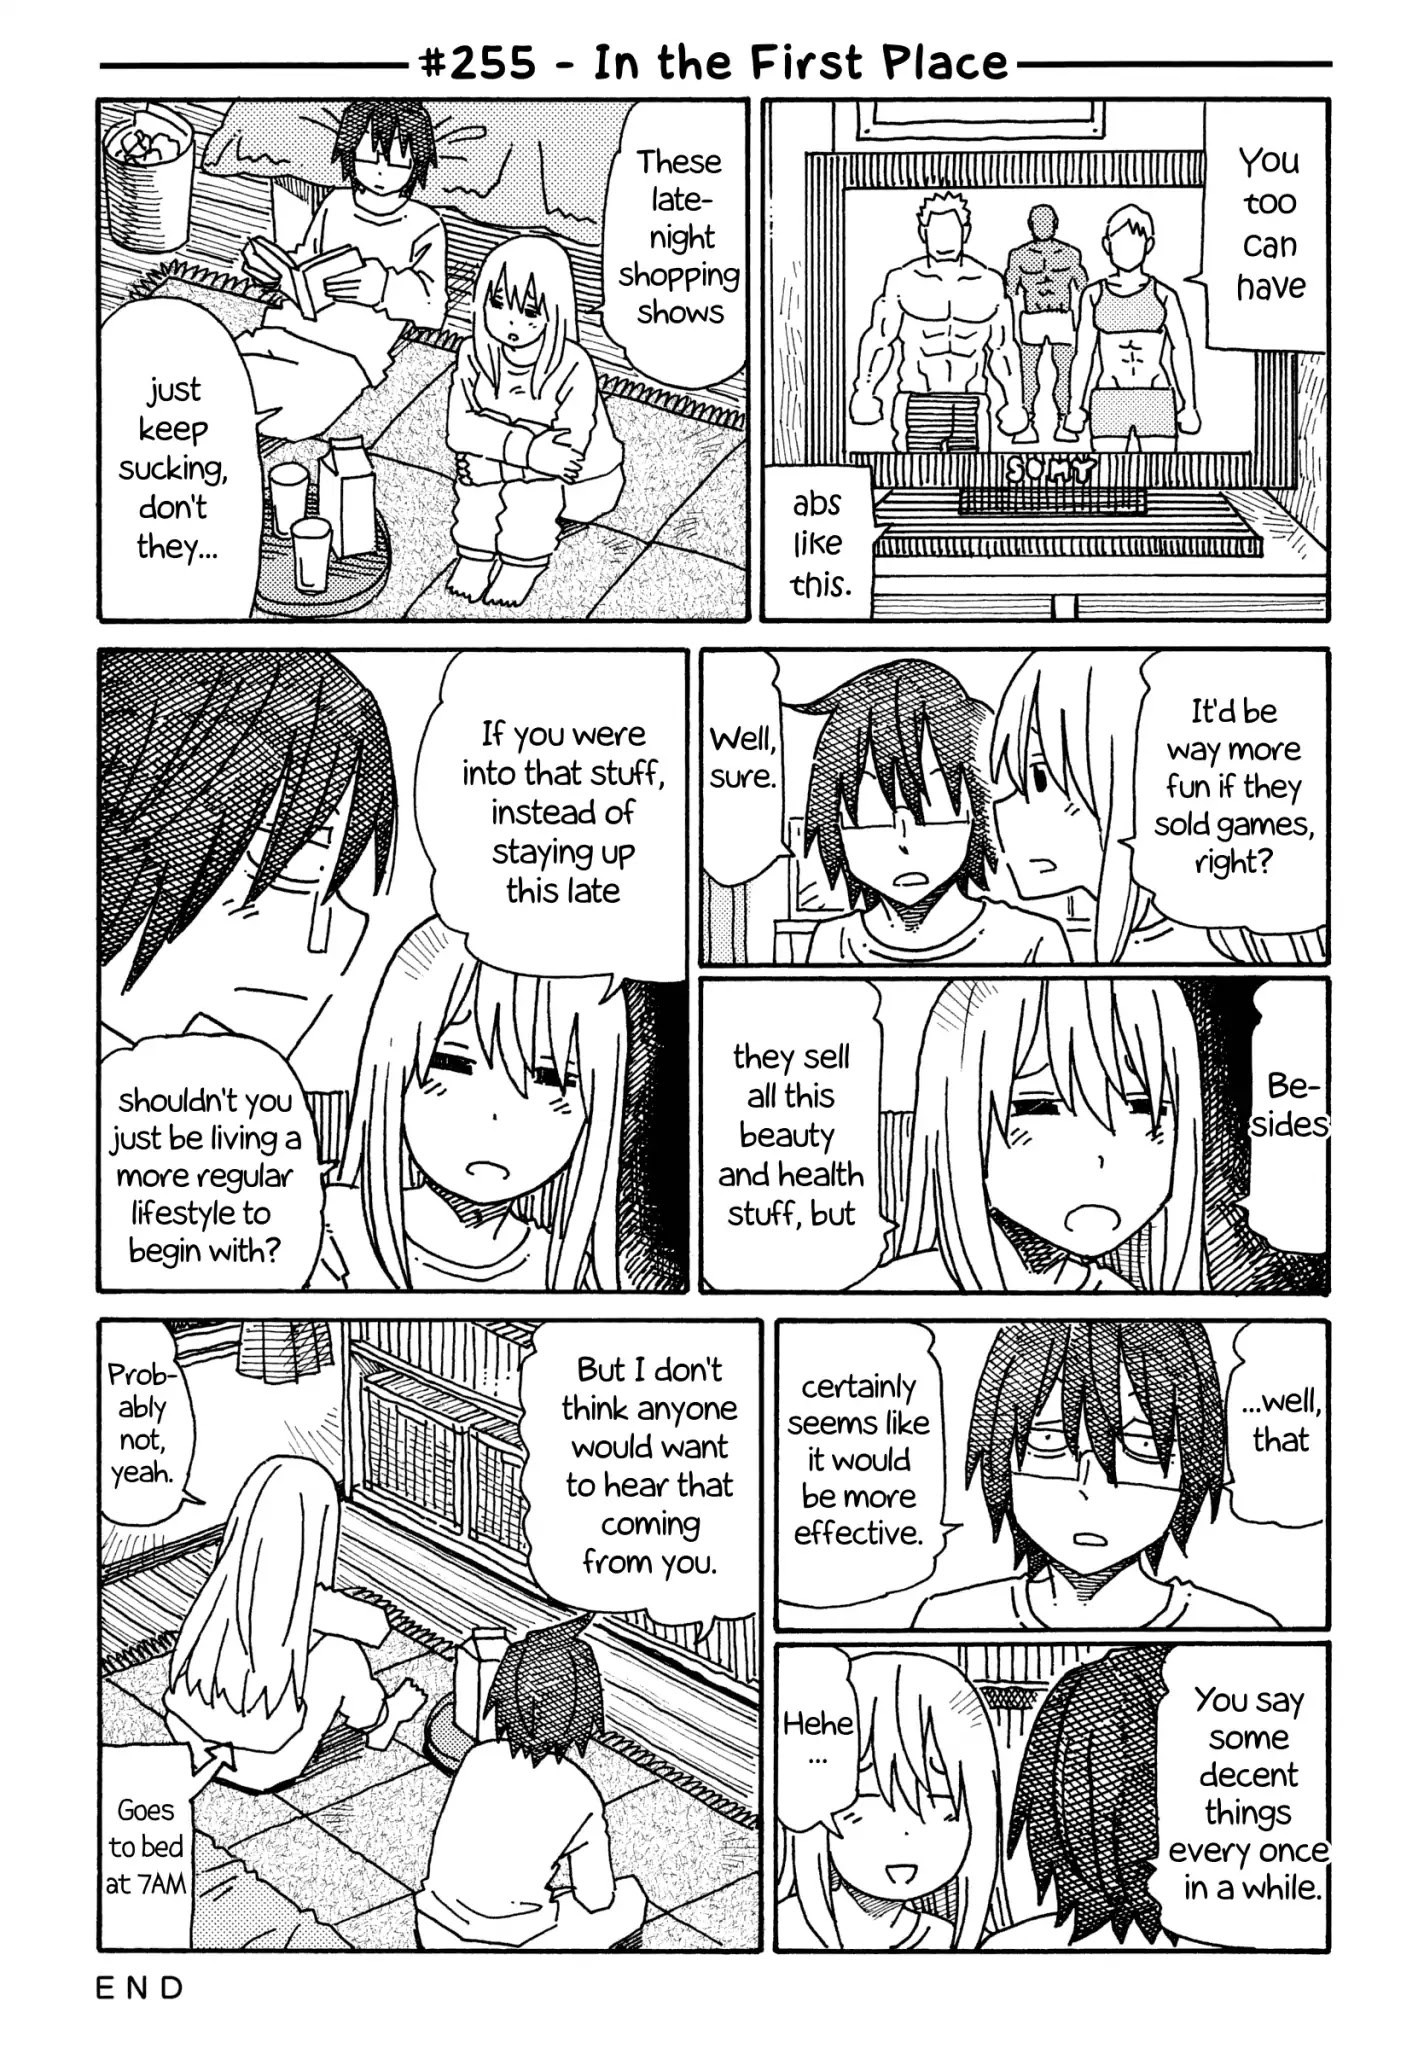 Hatarakanai Futari (The Jobless Siblings) Chapter 255: In The First Place